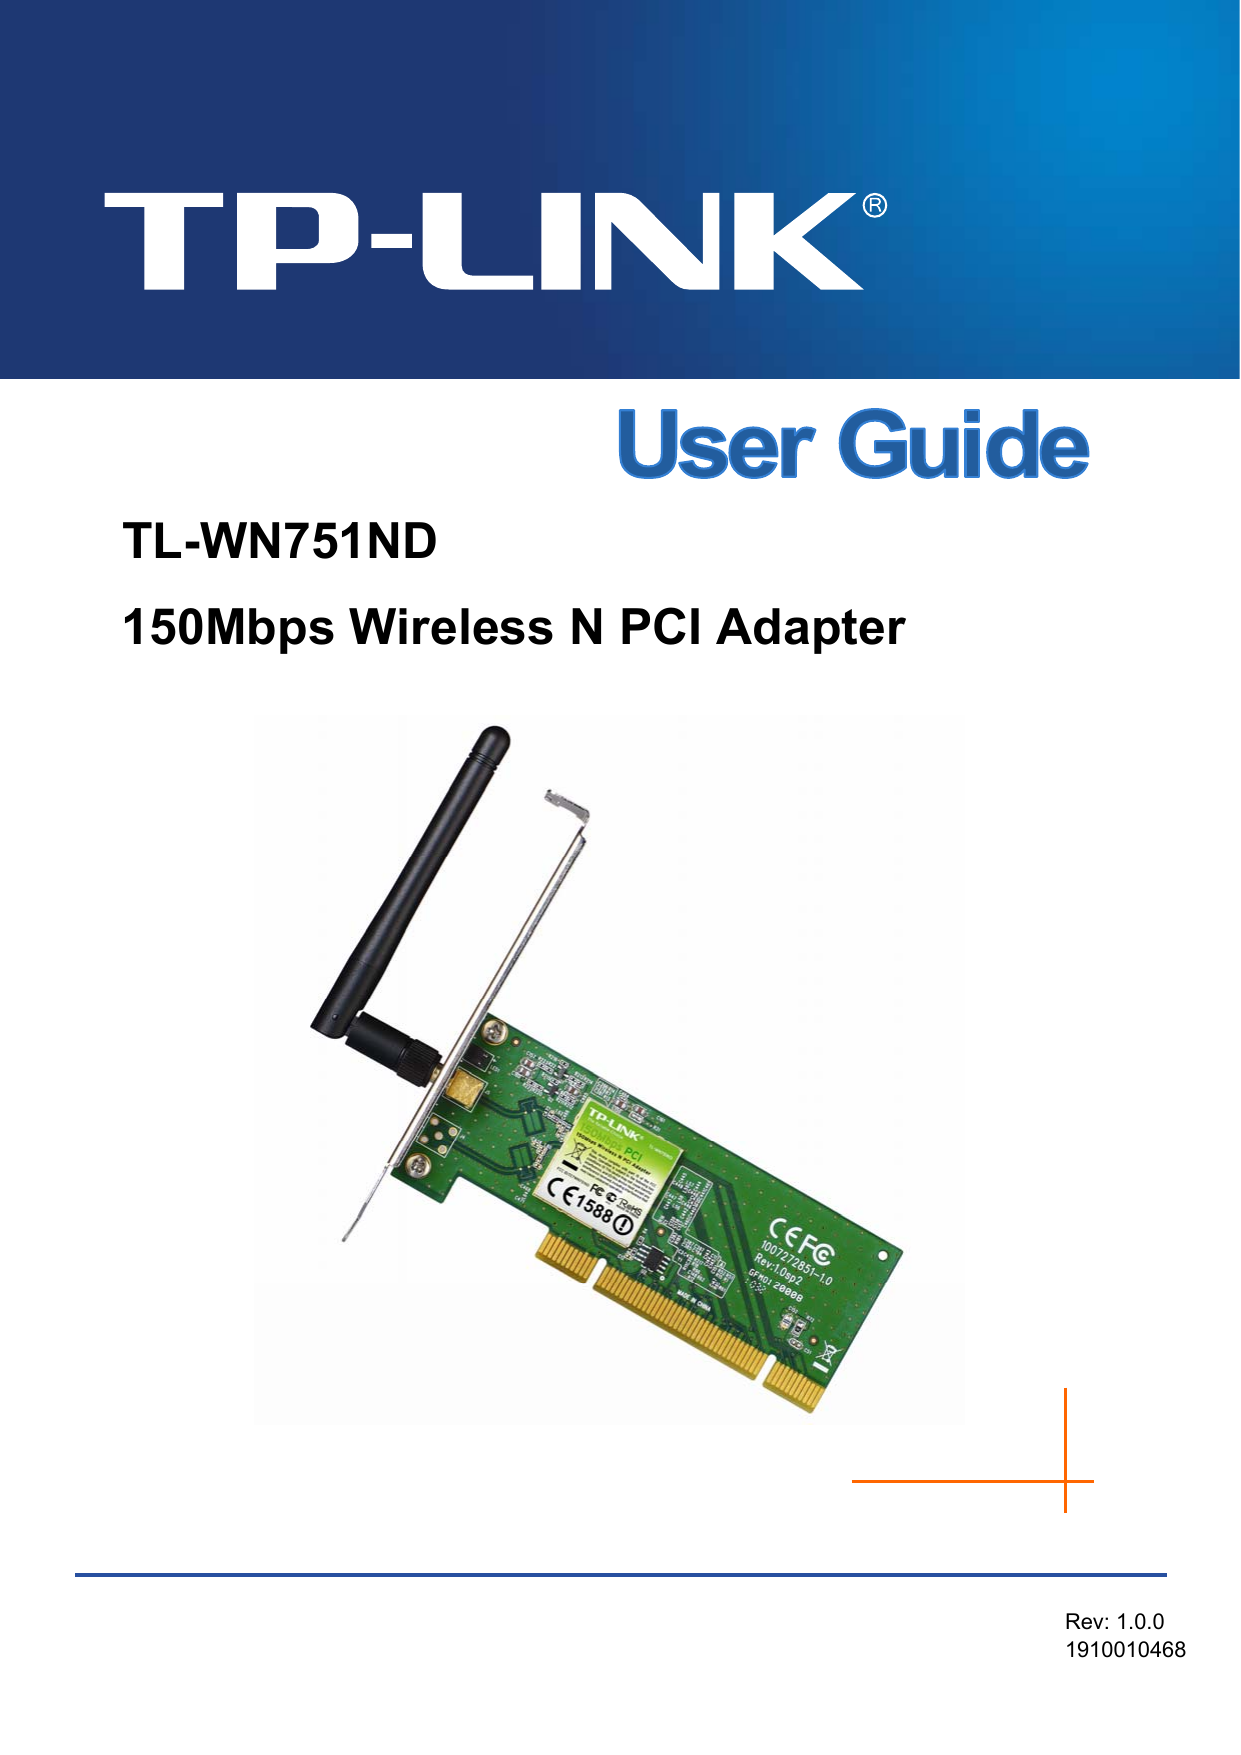   TL-WN751ND 150Mbps Wireless N PCI Adapter    Rev: 1.0.0 1910010468 